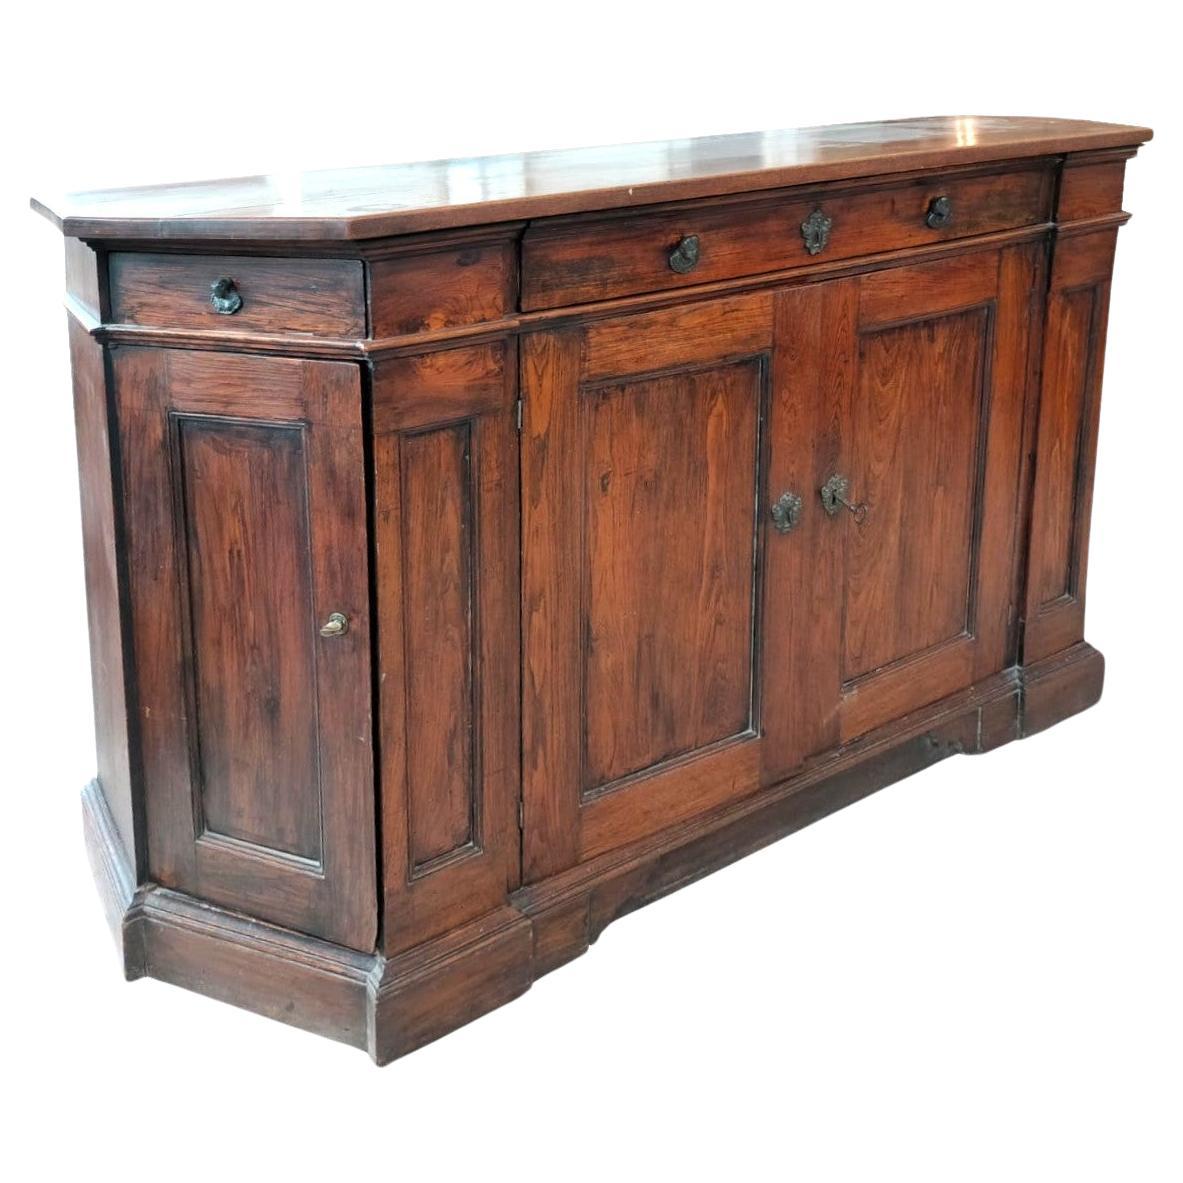 Sloping Bolognese sideboard from the mid-1700s, of ample dimensions. With patina For Sale